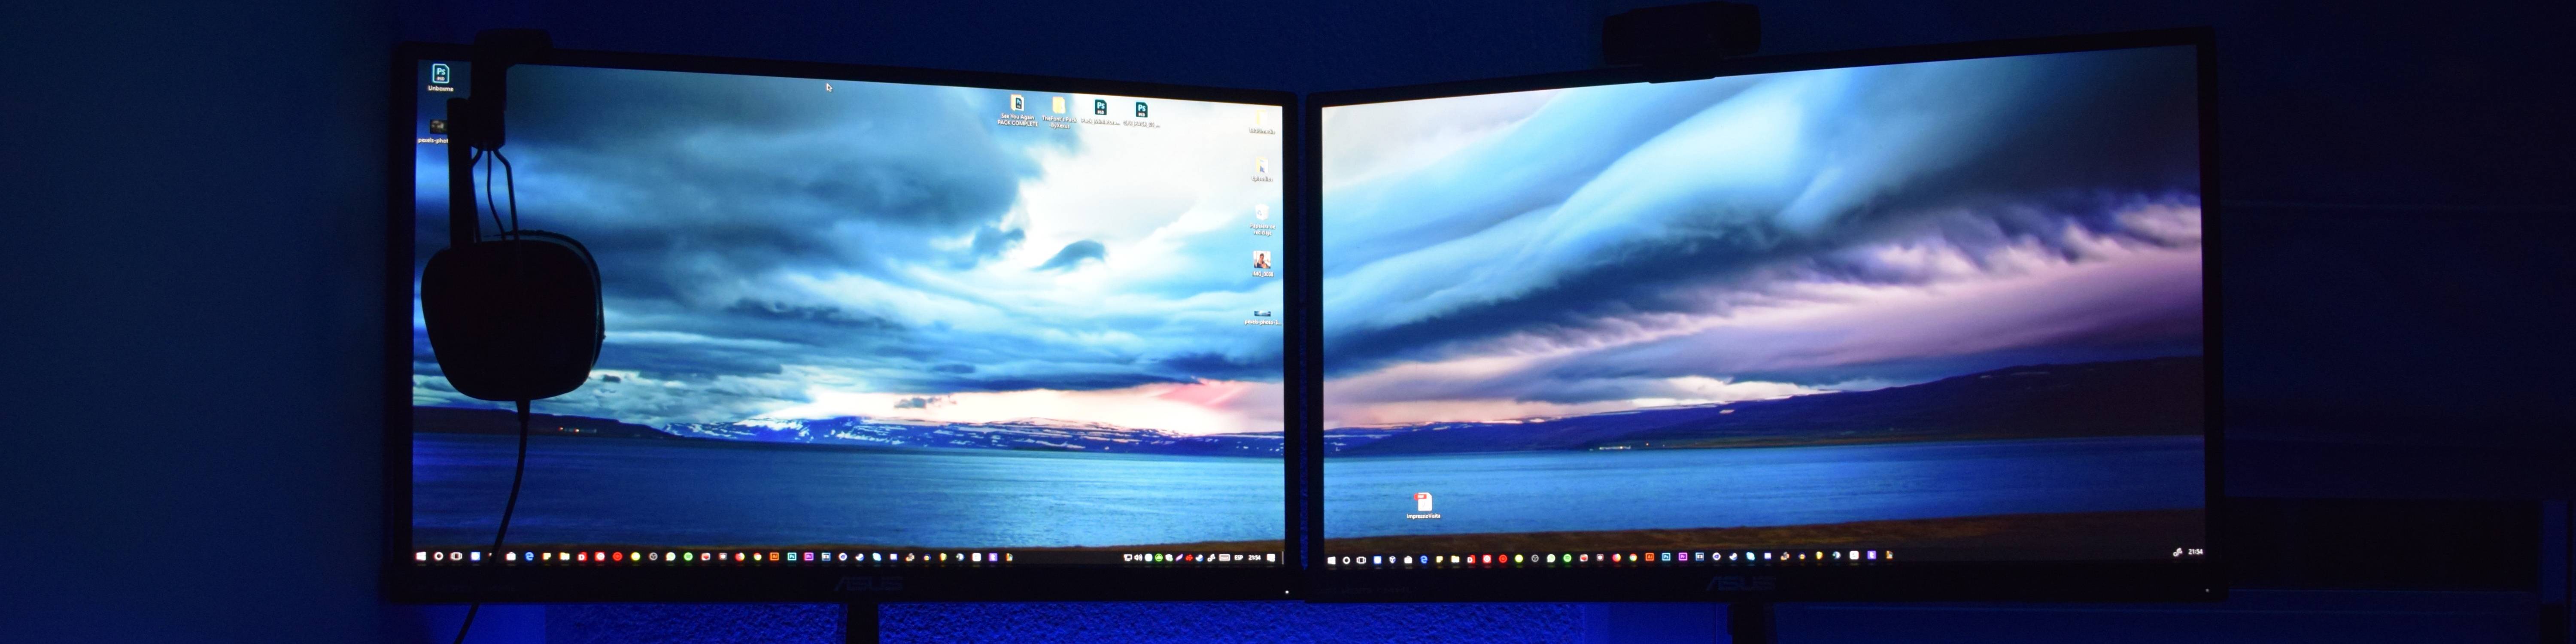 Two Computer Monitor Screens